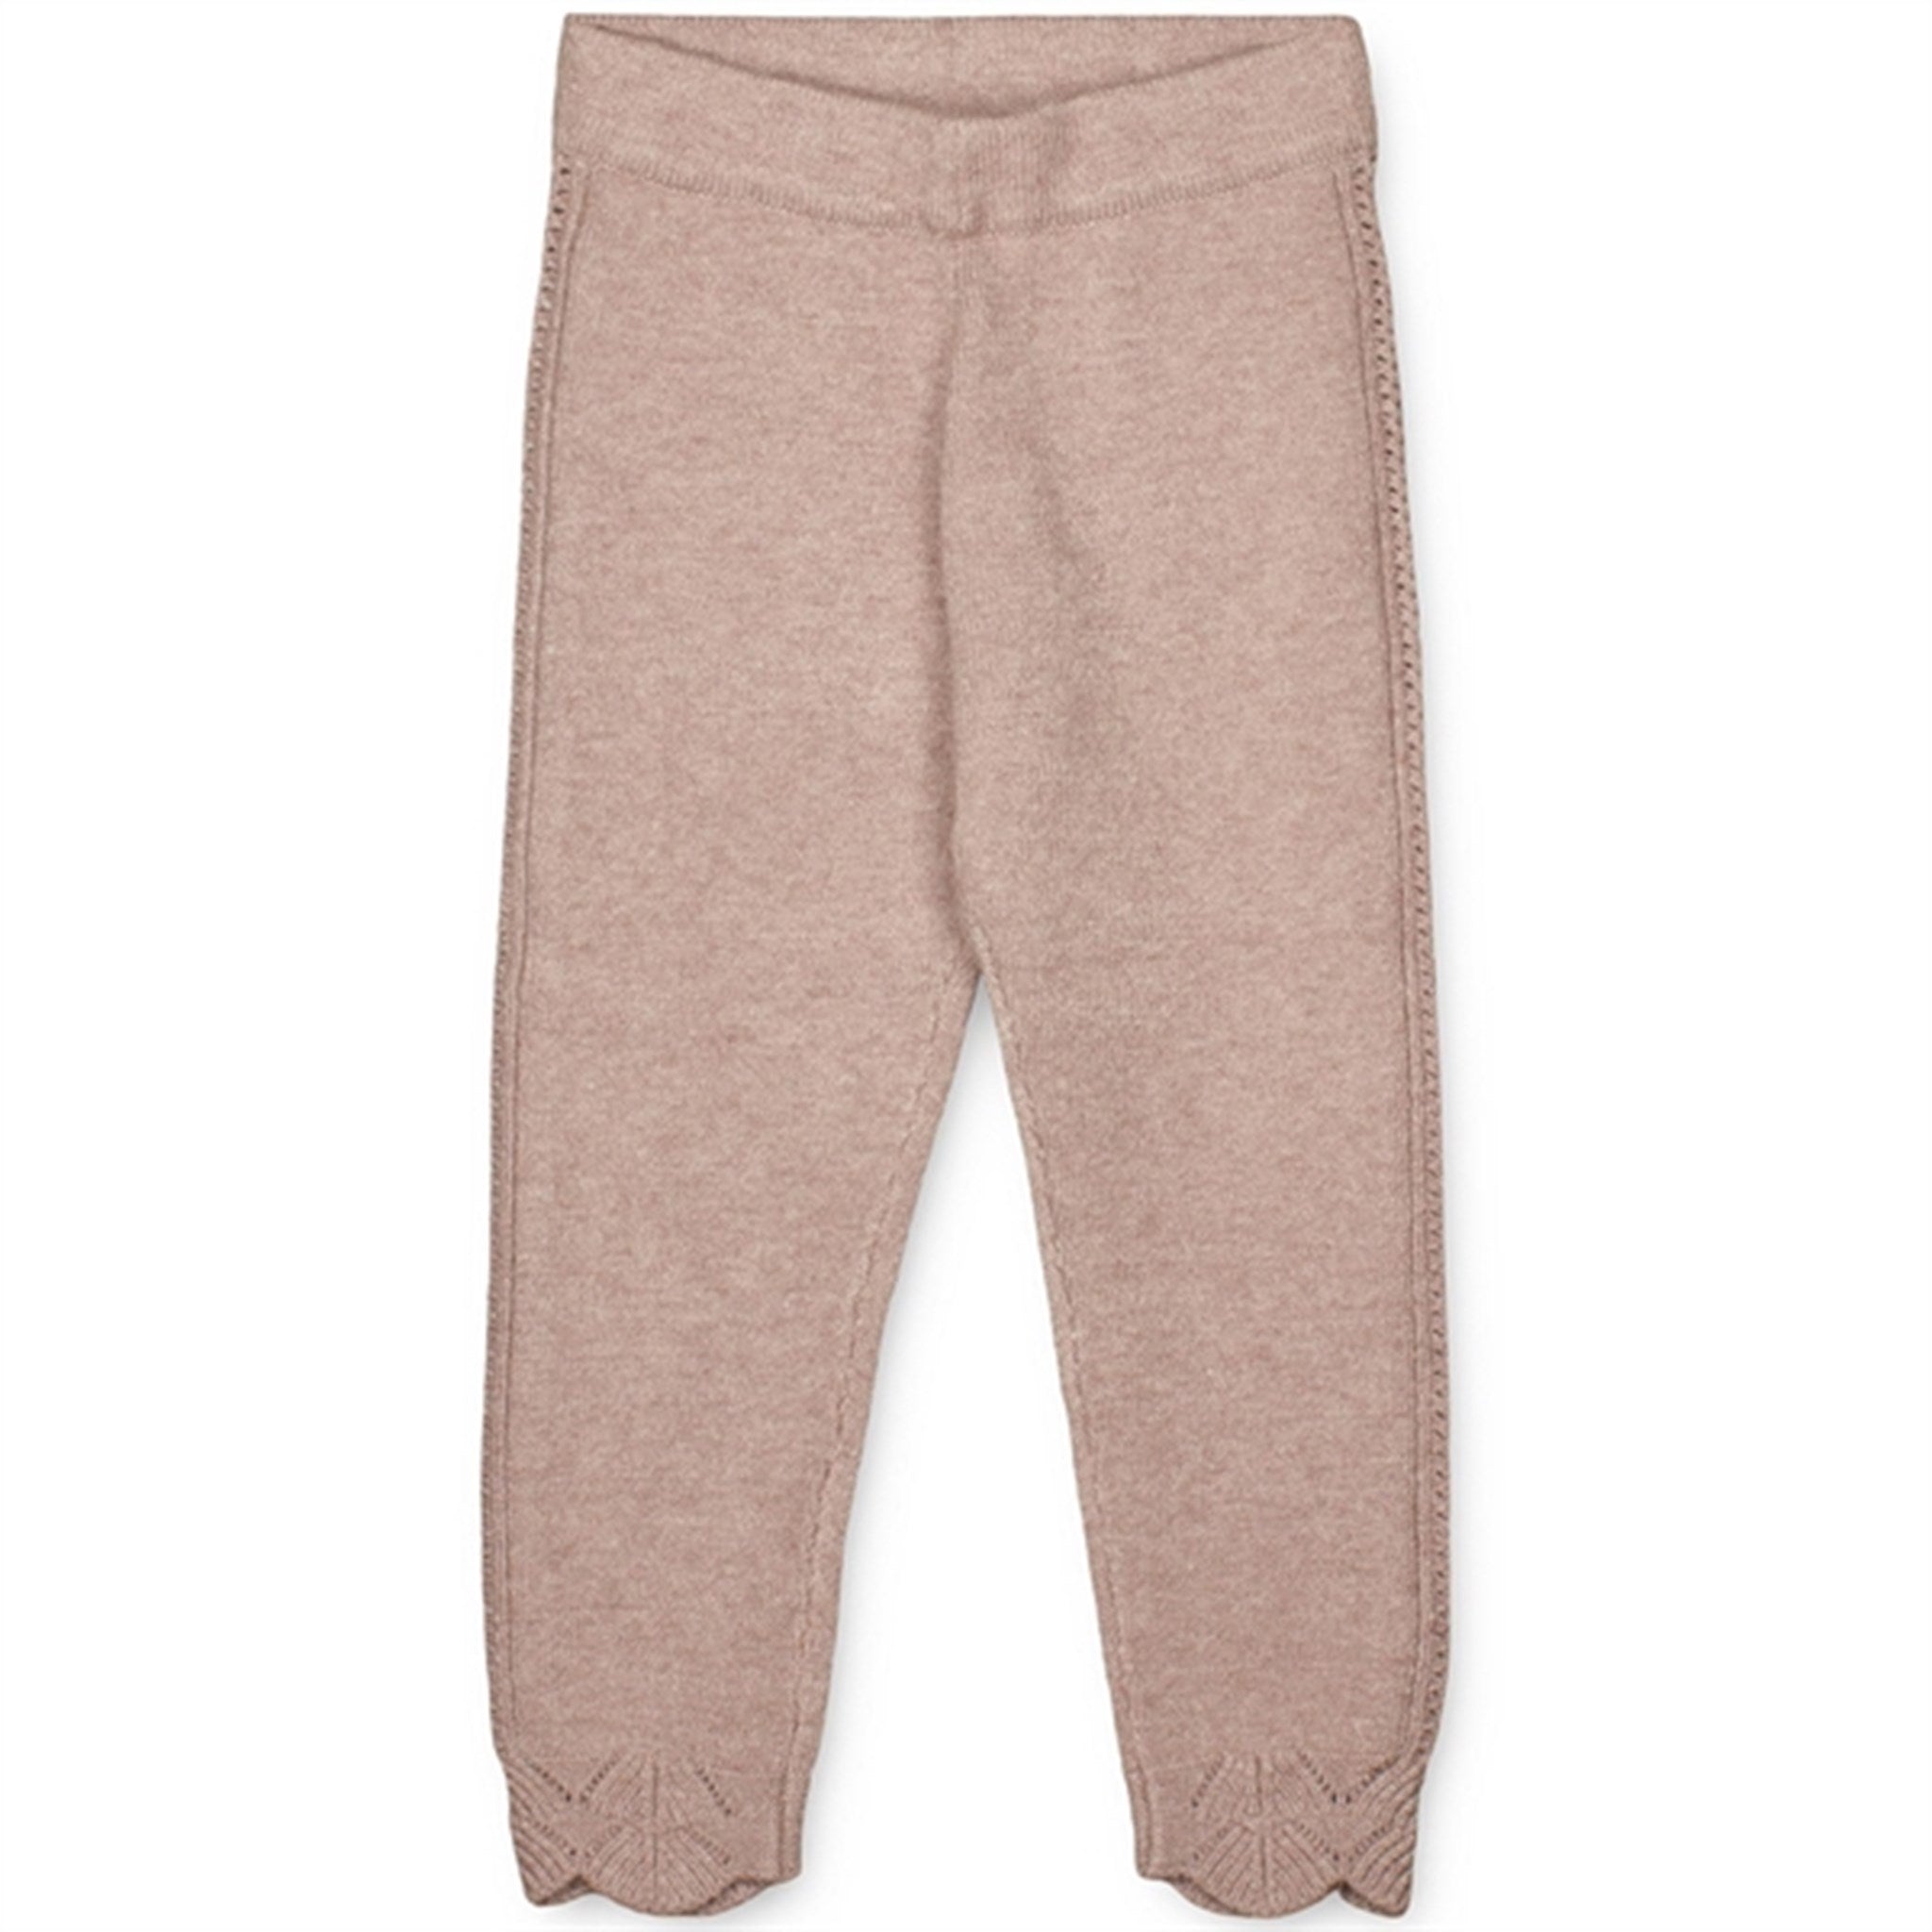 FLIINK Sphinx Lilly Knit Pants